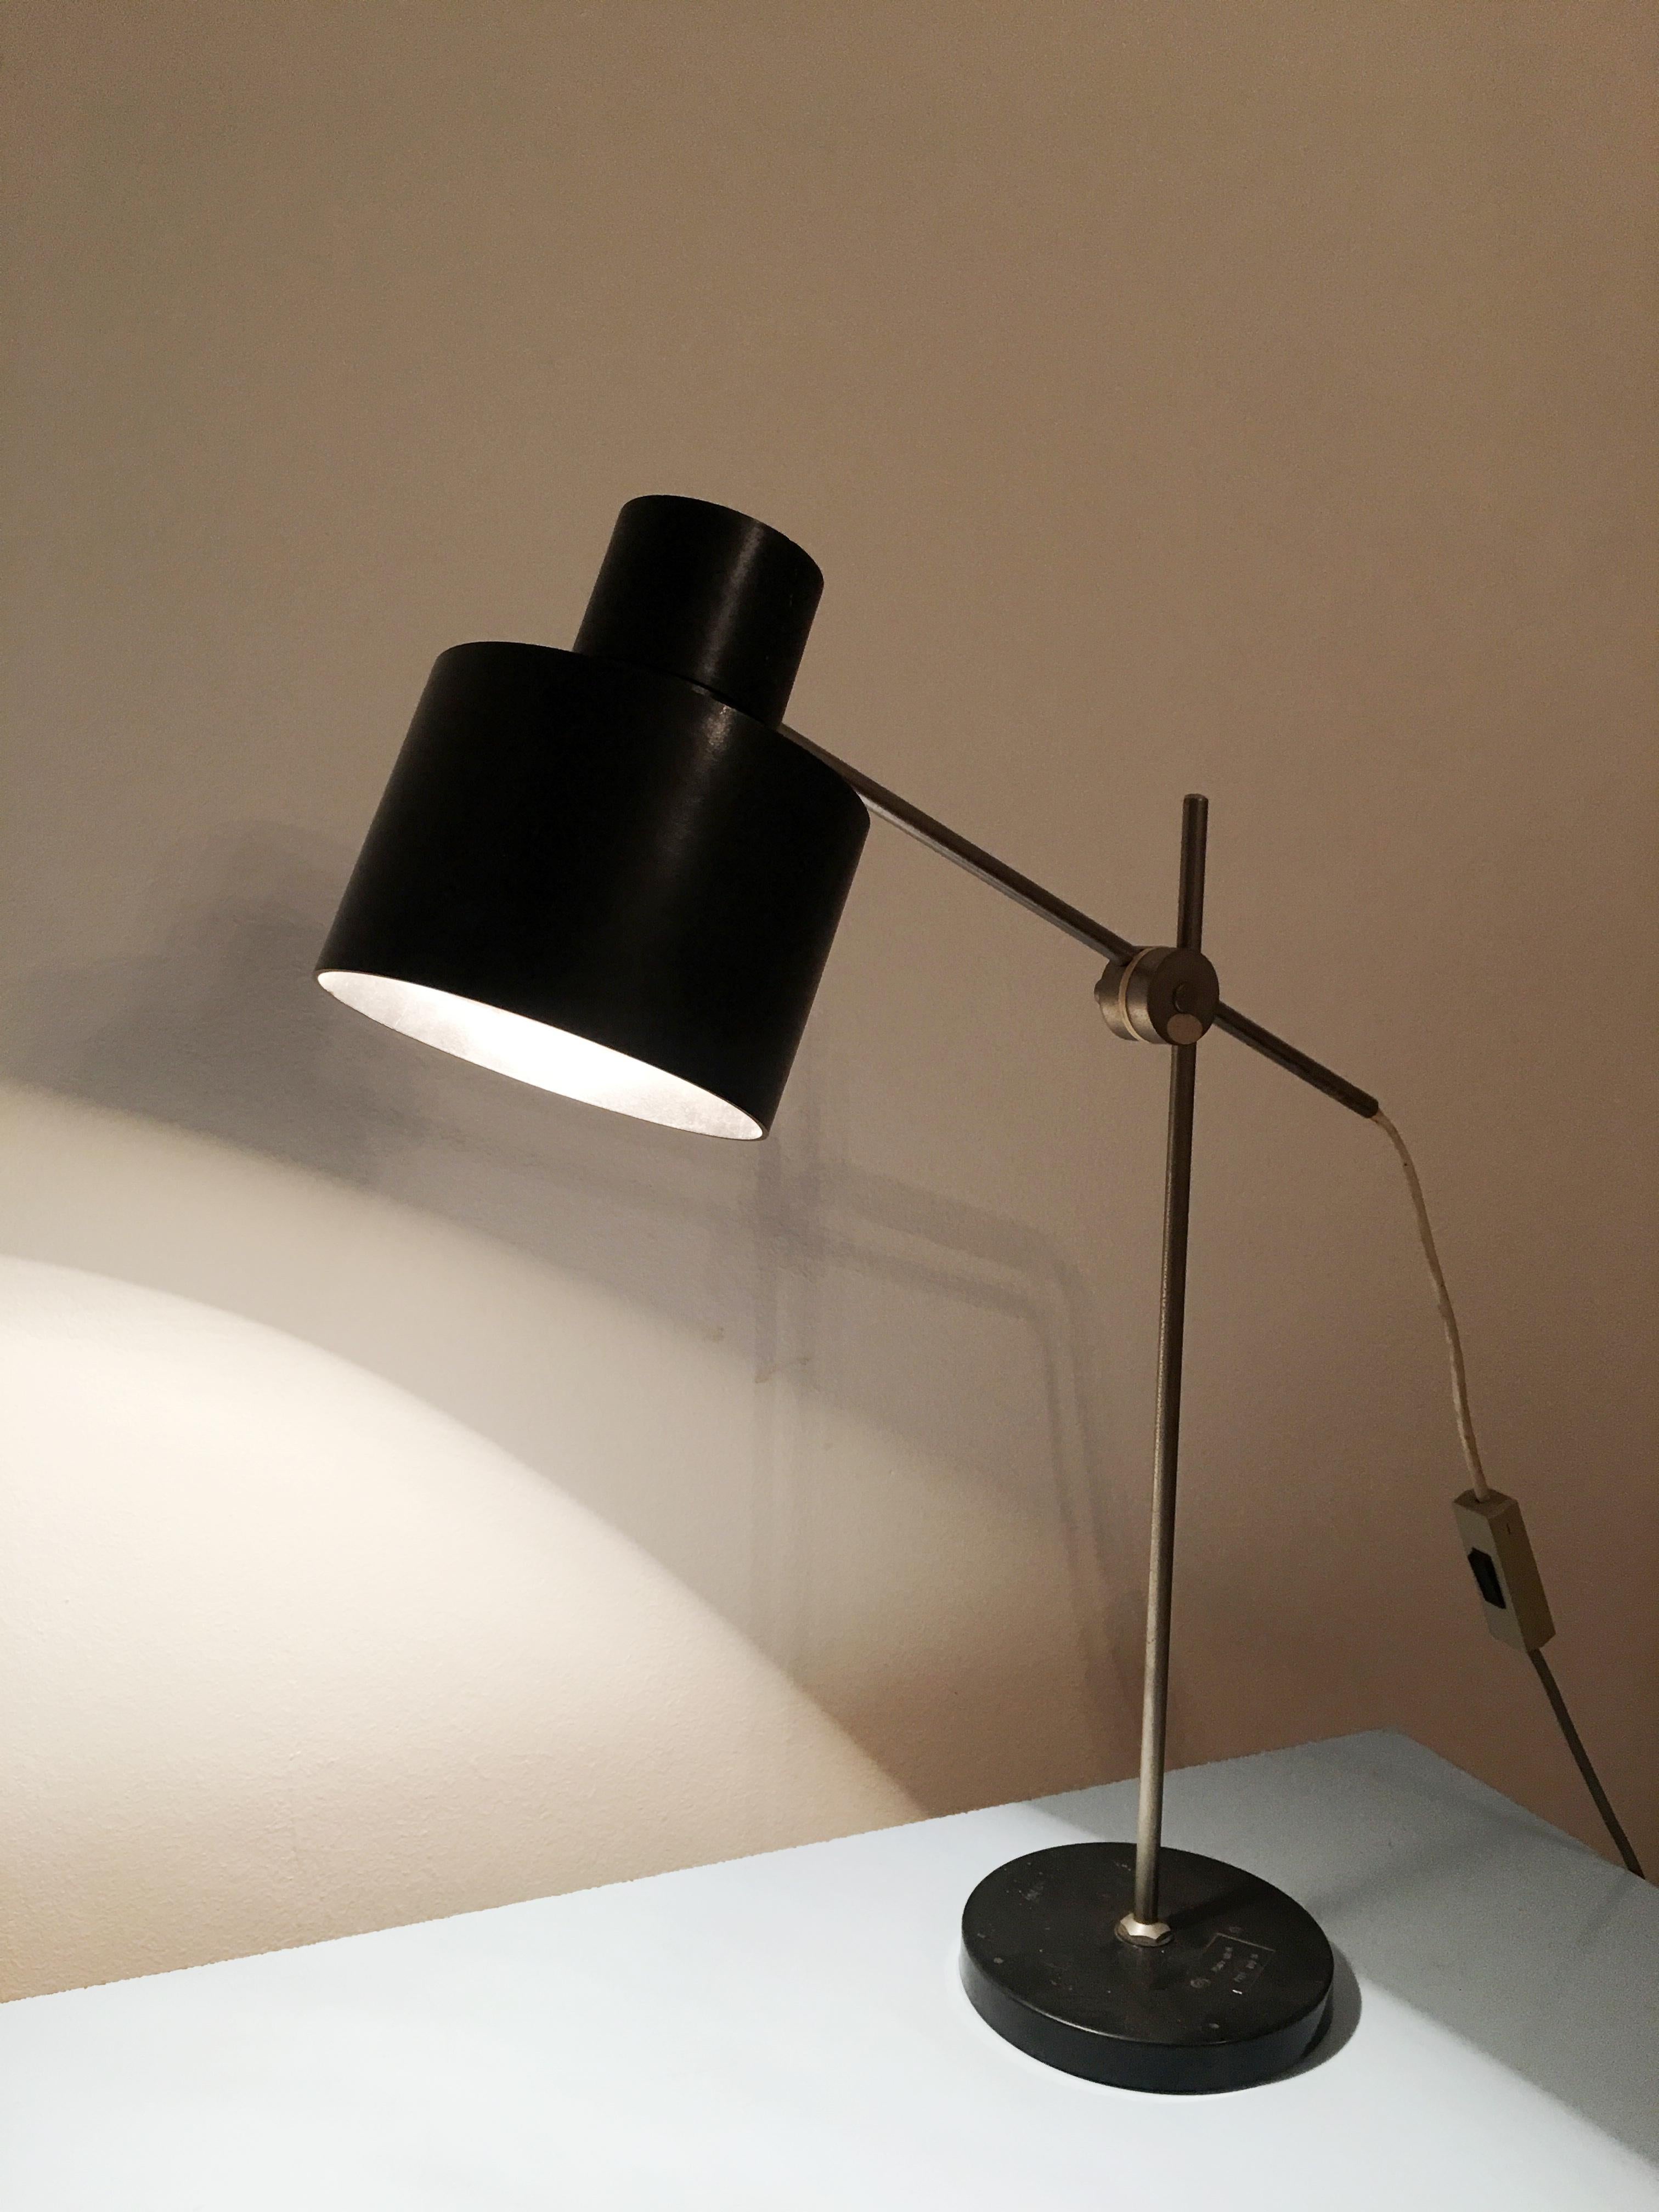 Industrial Office Lamp by Jan Suchan for Elektrosvit, 1967 In Good Condition For Sale In Prague, CZ